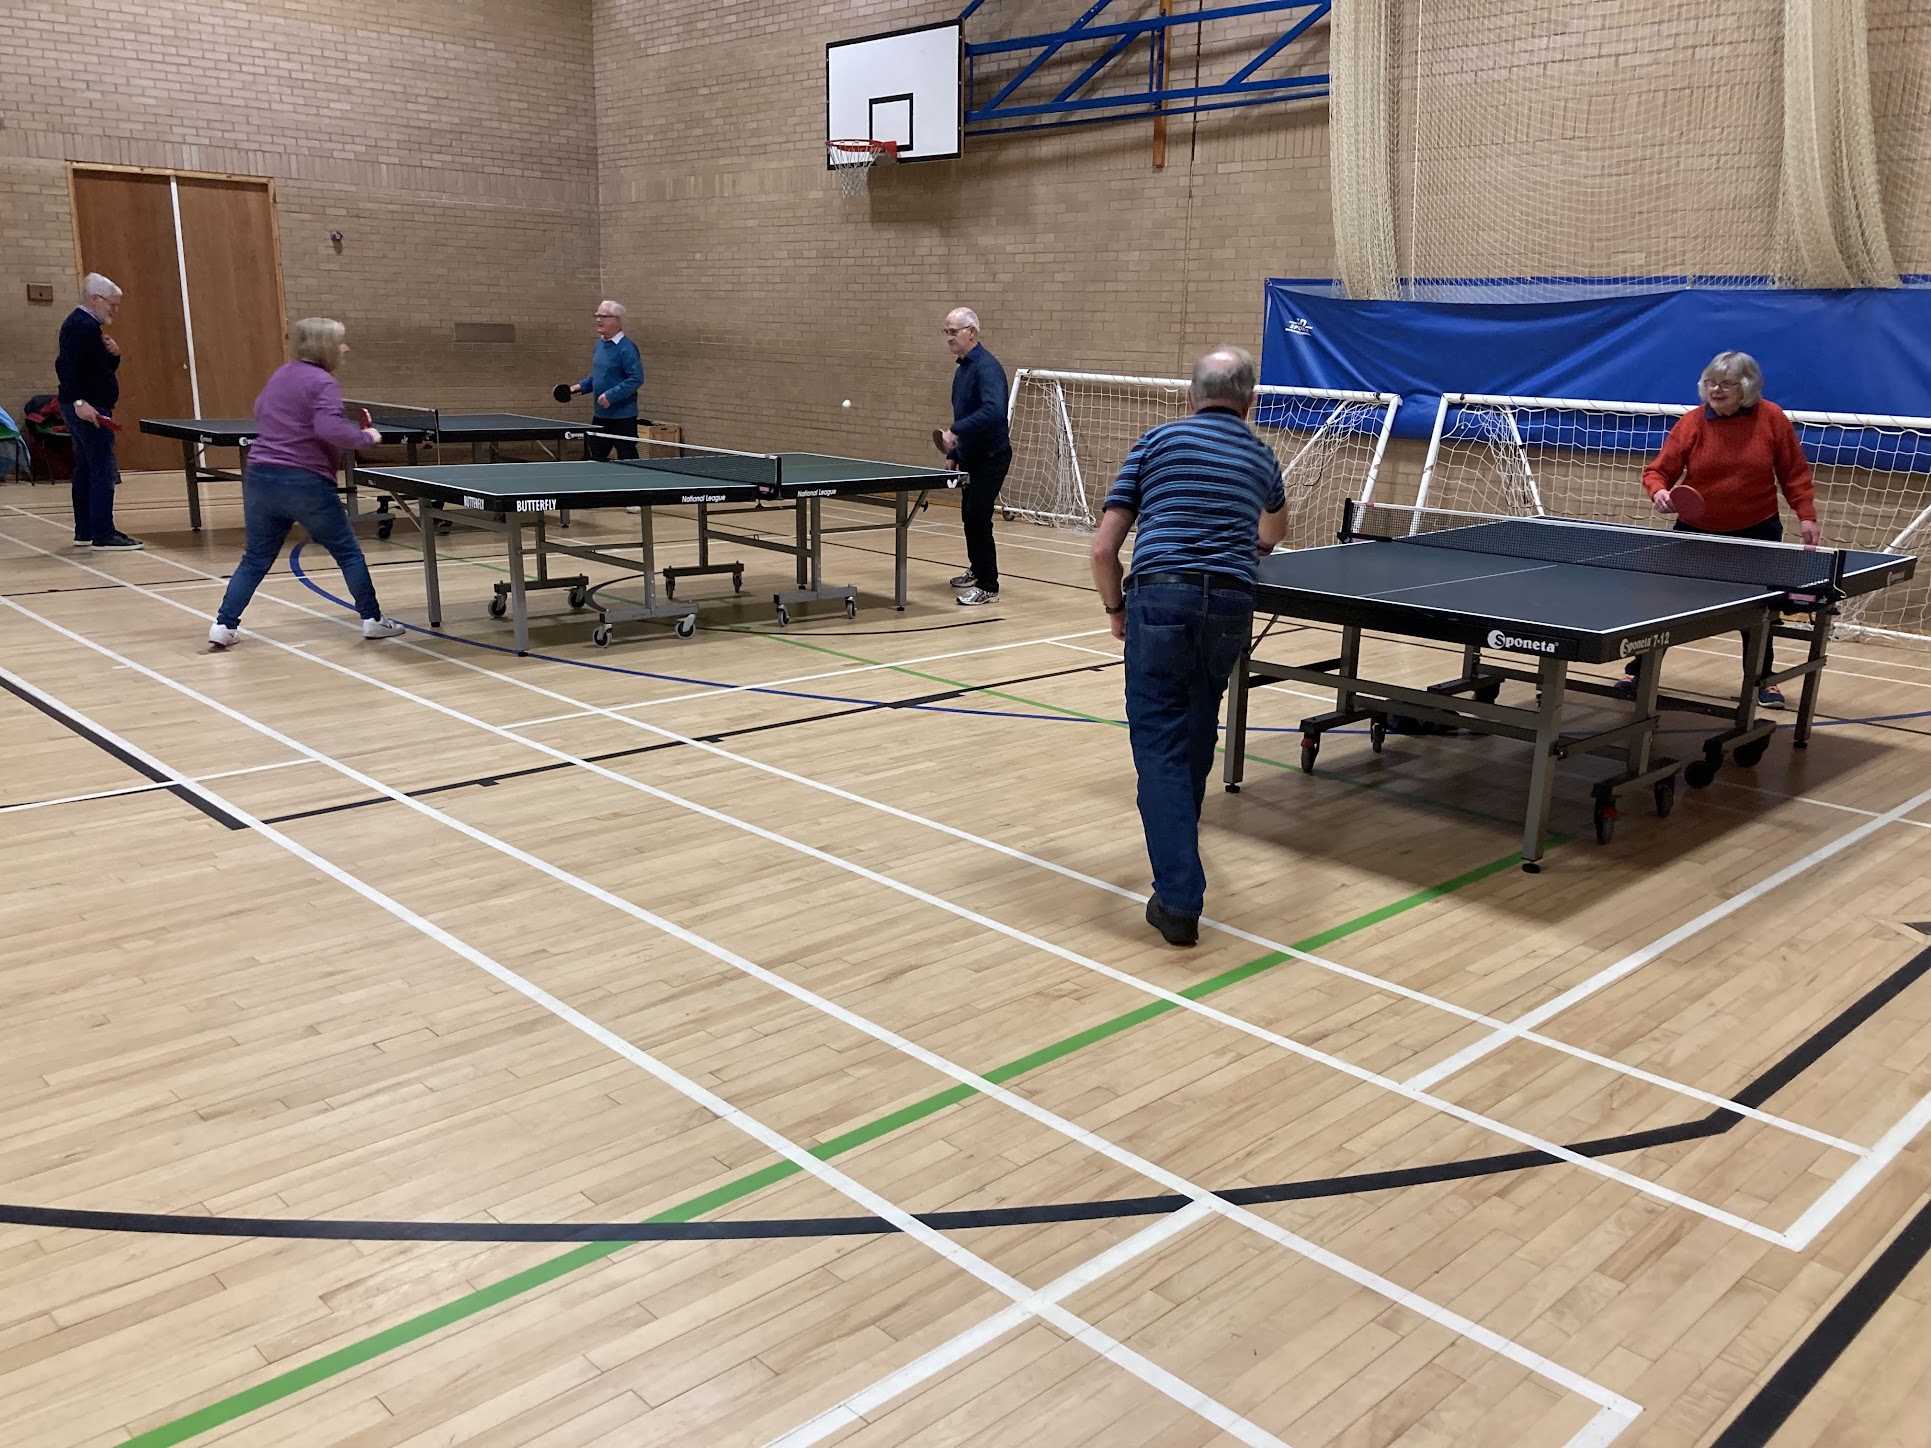 Table tennis group at Ladywood Centre